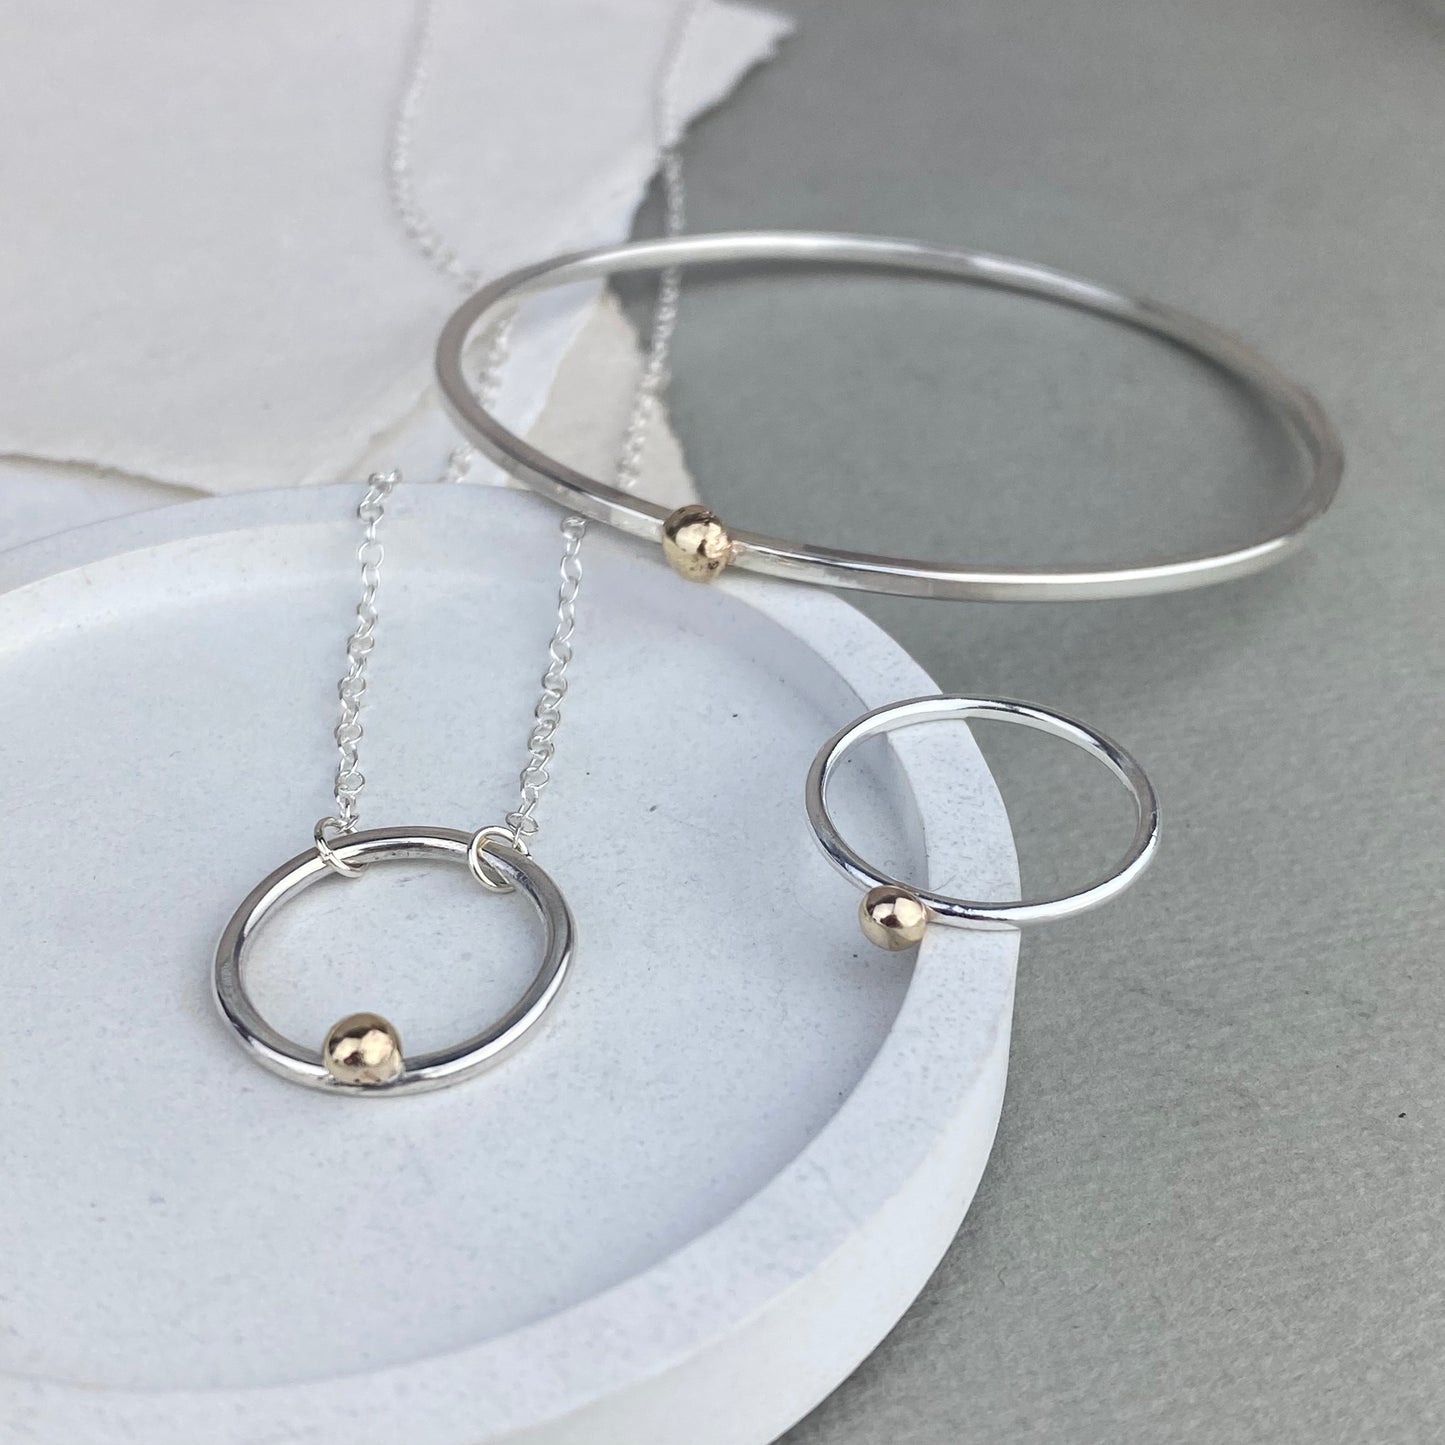 The Broad Necklace - sterling silver and 9ct gold personalised hoop pendant